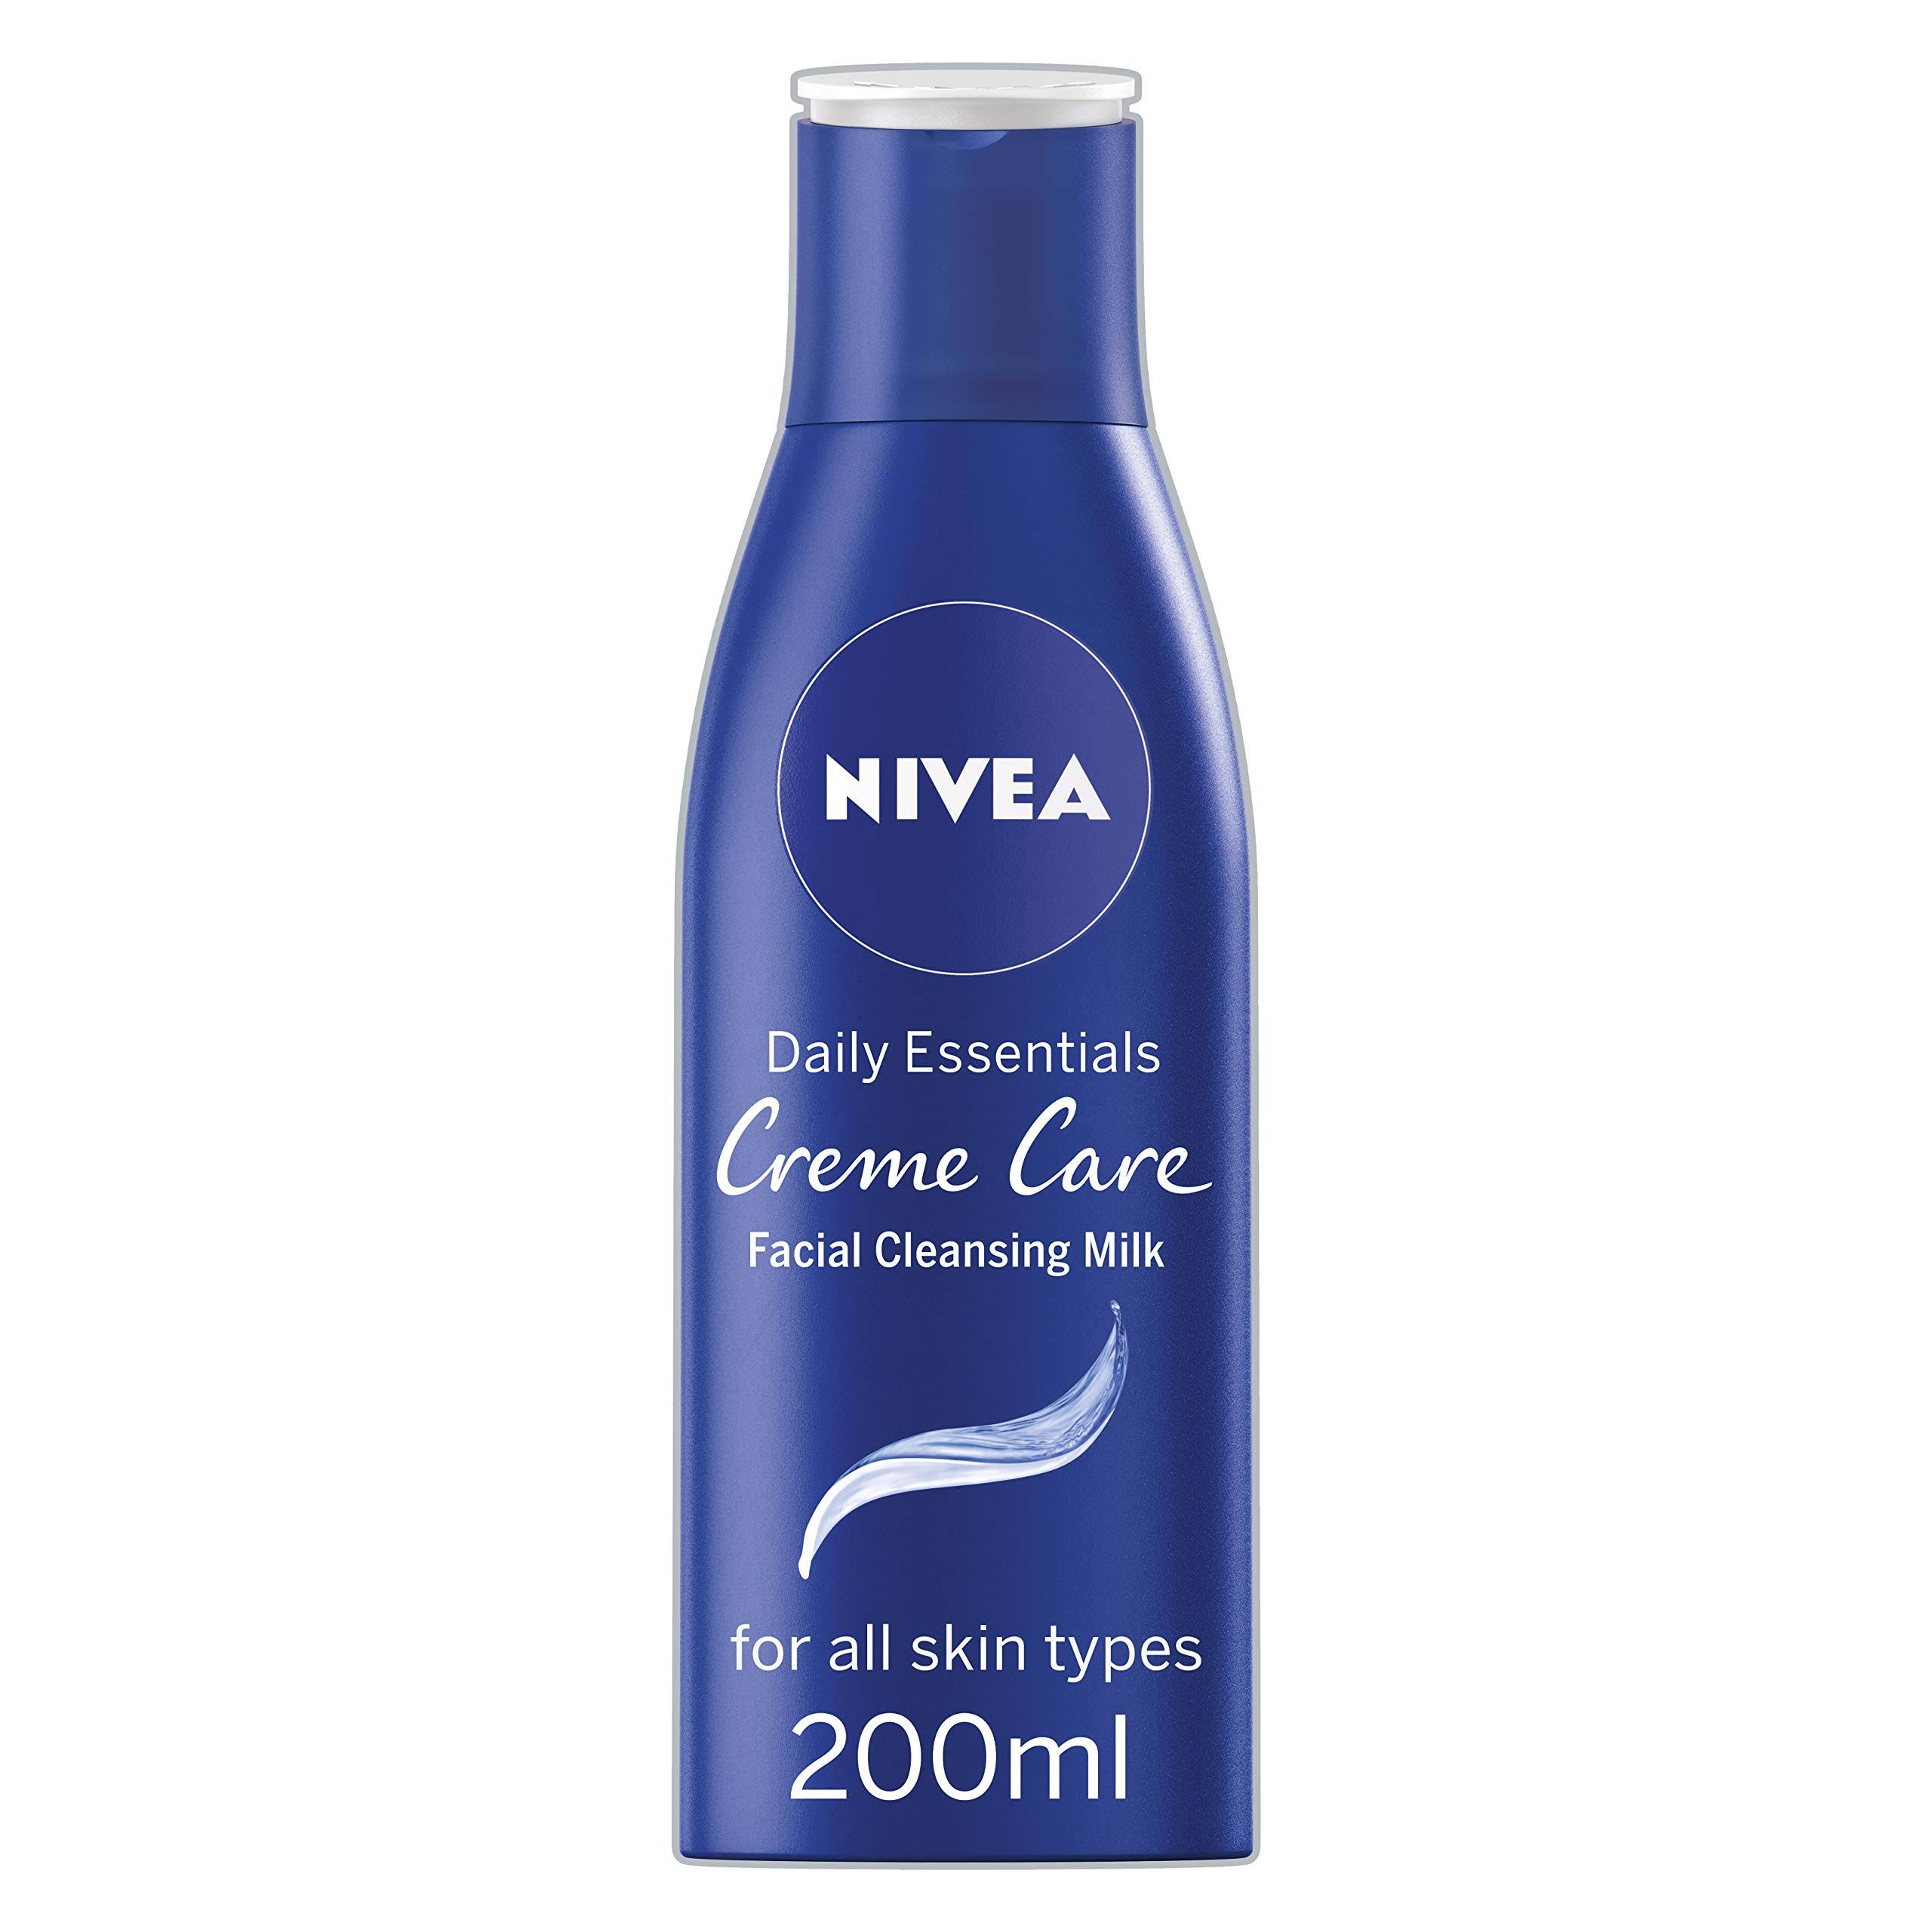 Nivea Daily Essentials Creme Care Cleansing Lotion - 200ml